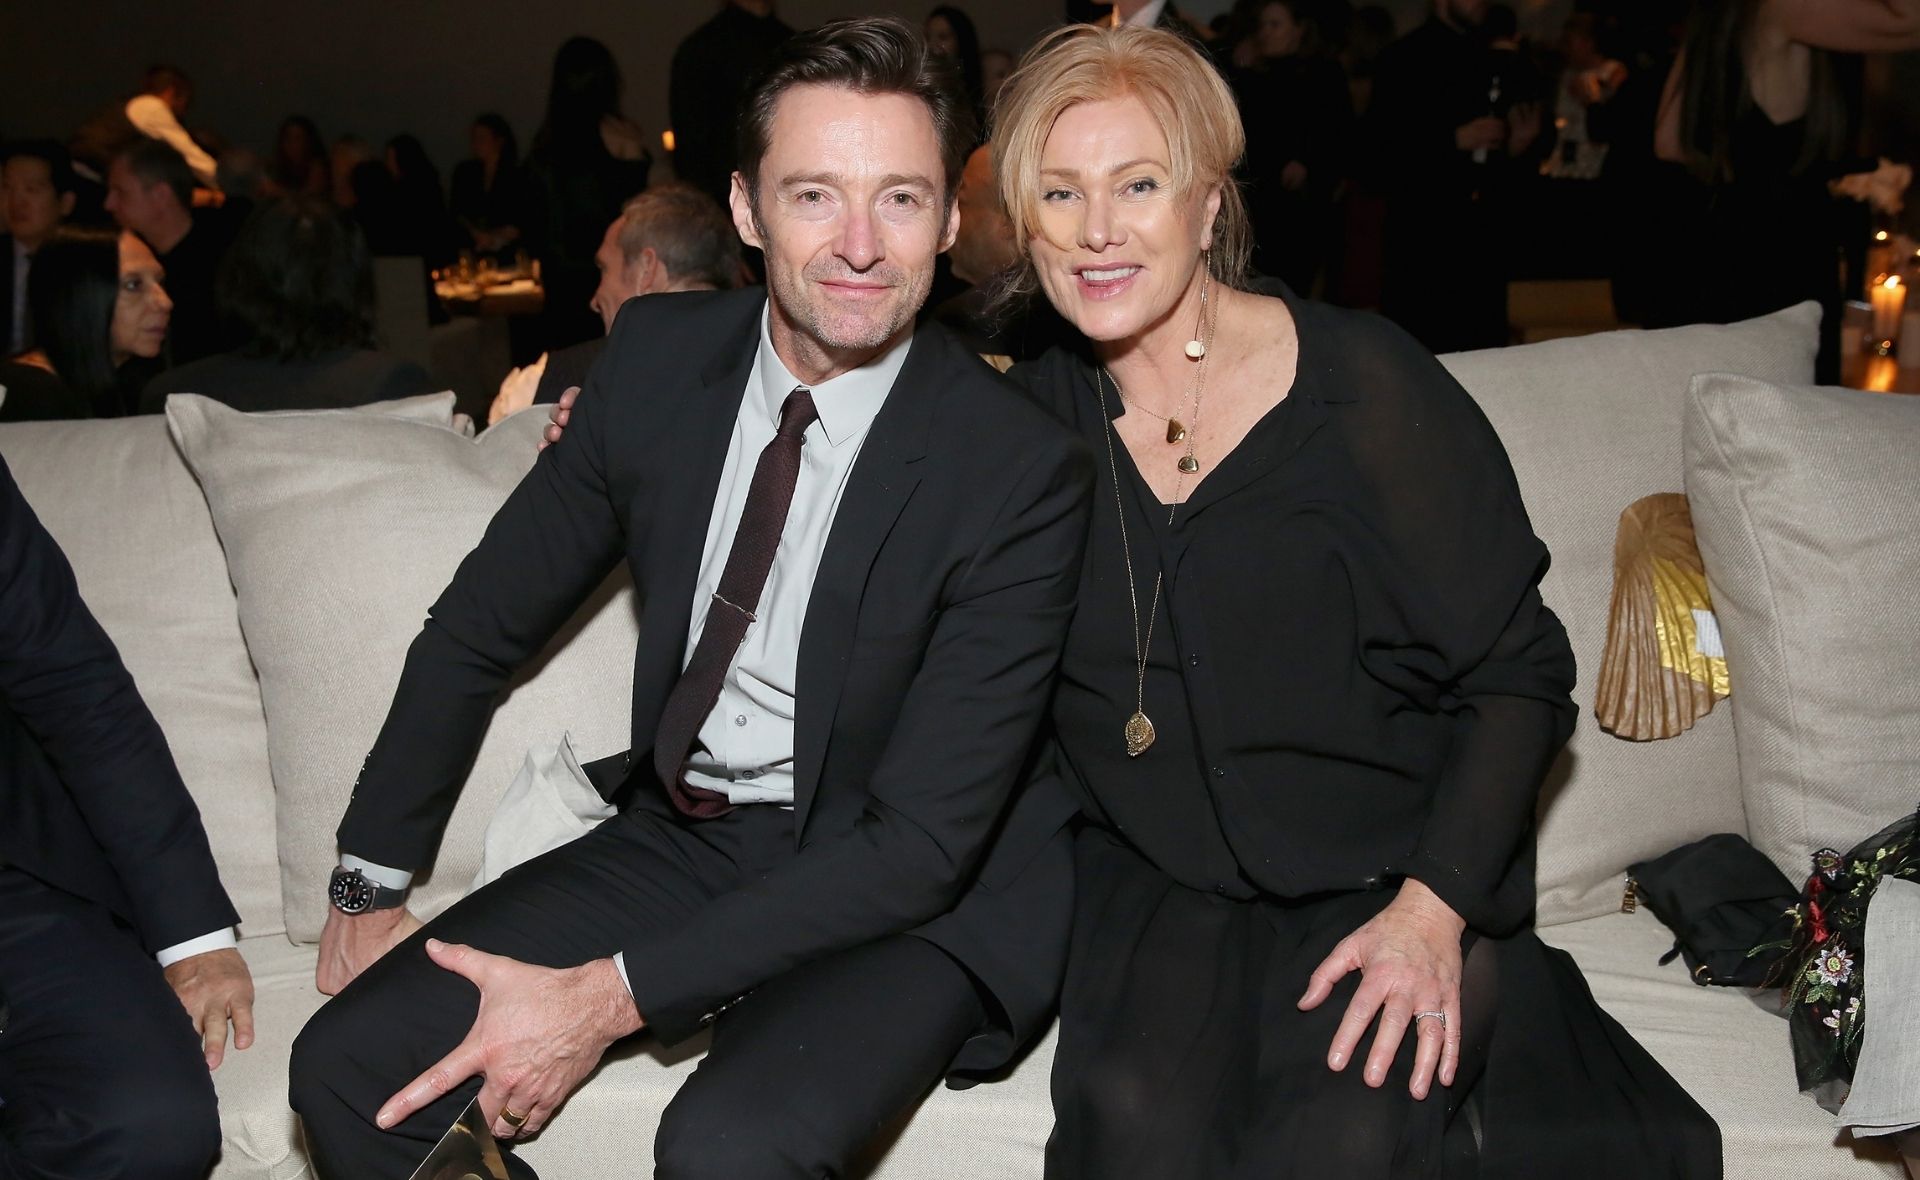 Hugh Jackman celebrates his 26th wedding anniversary with Deborra-Lee Furness and reveals their favourite hobby